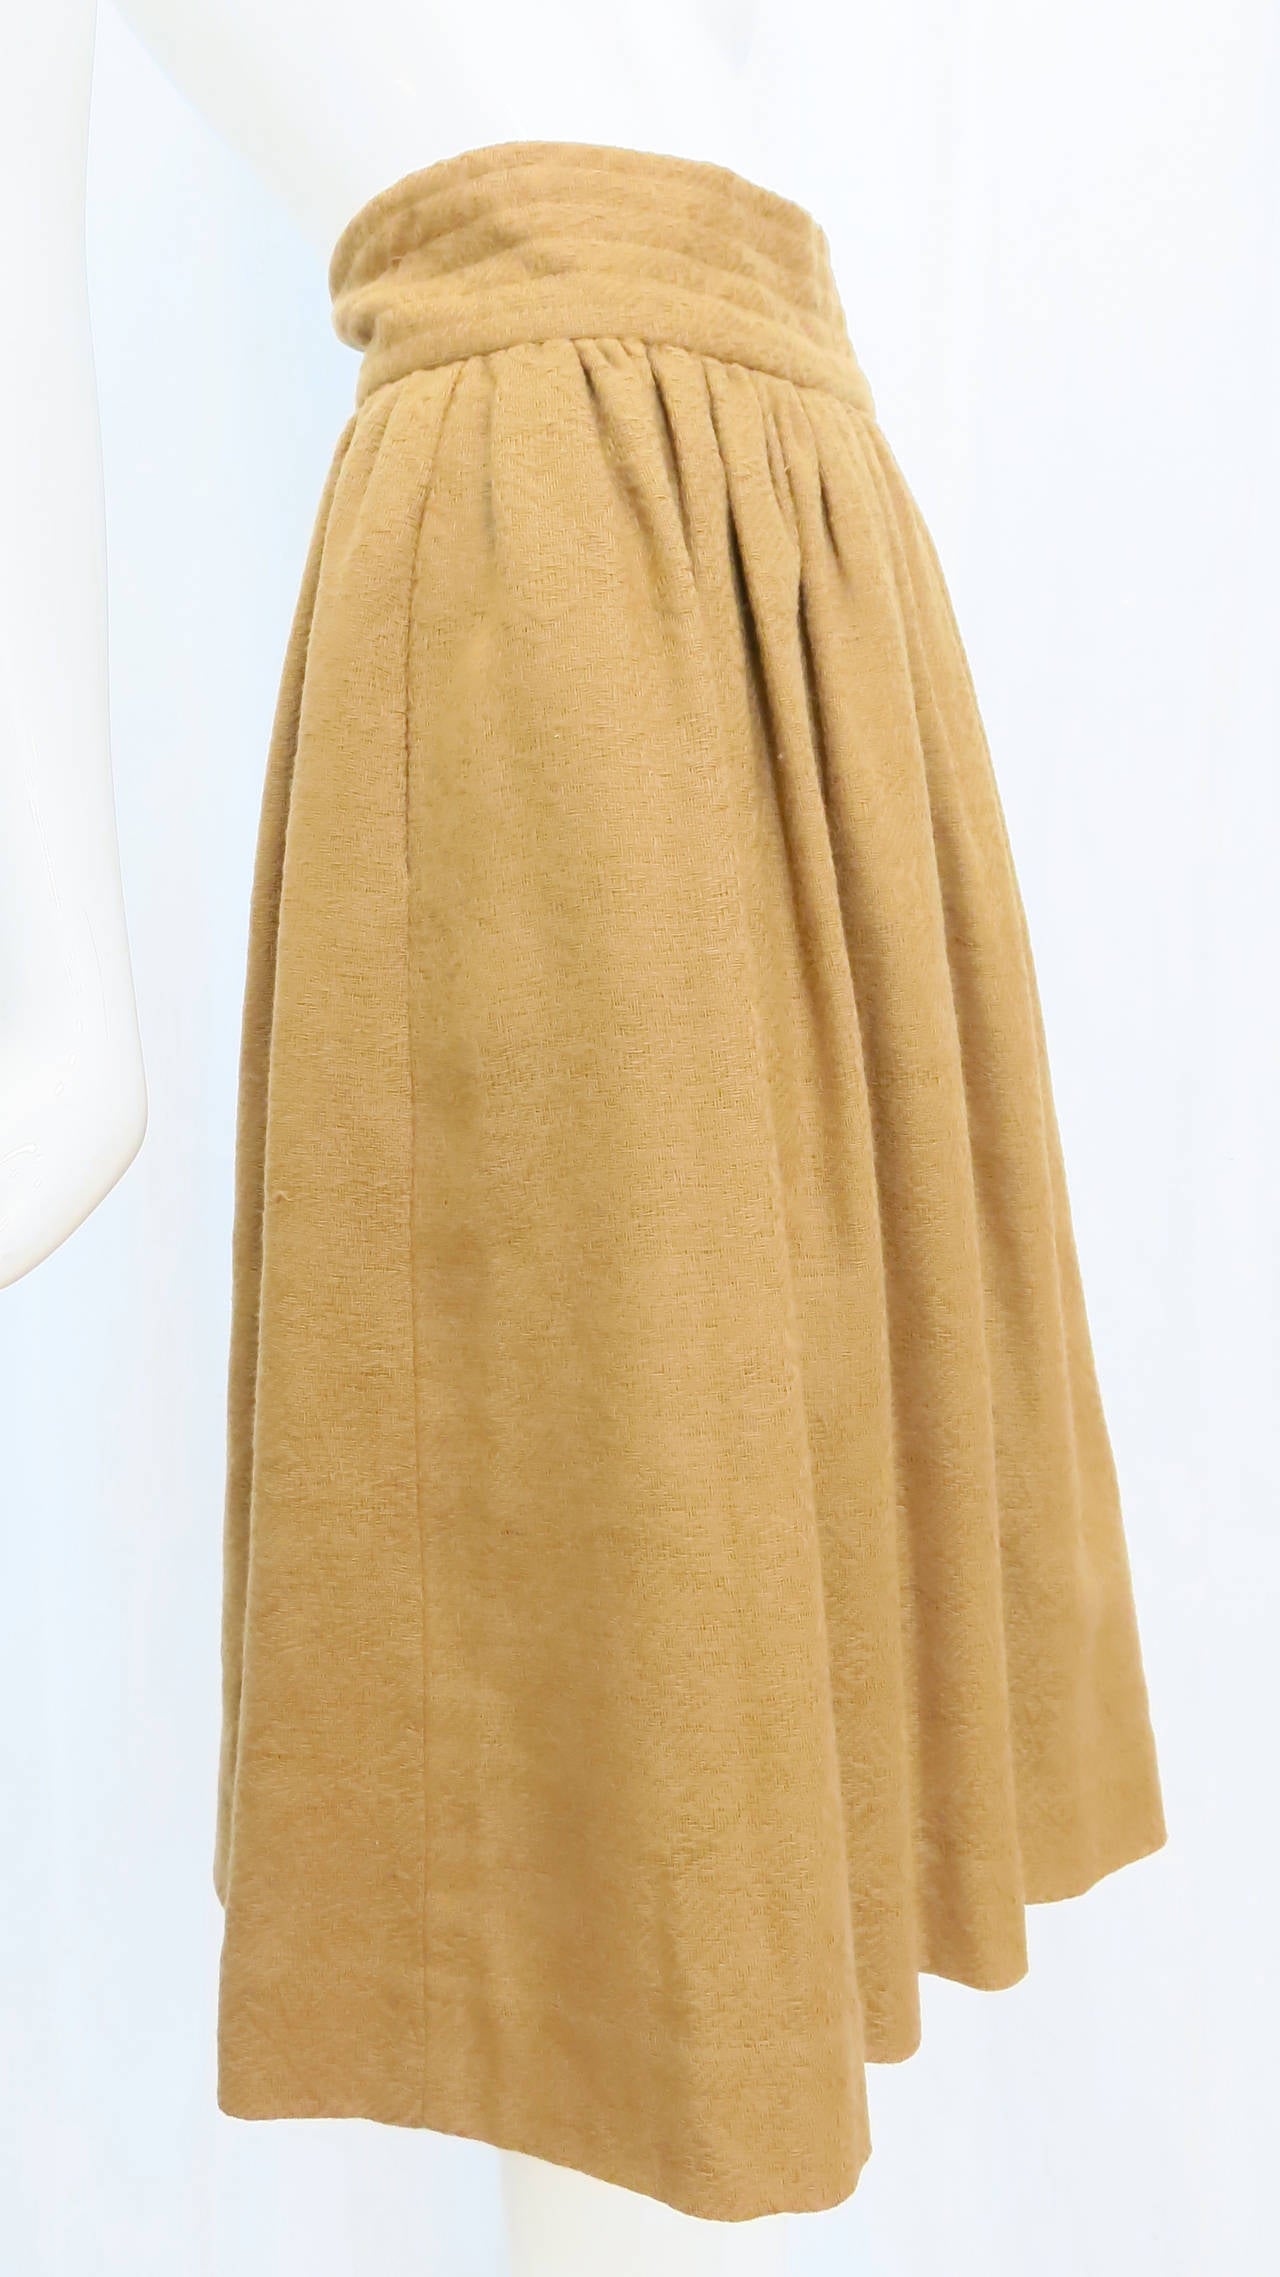 Minimal and versatile, this rustic maxi wool skirt from Valentino is a classic staple for your cool-weather wardrobe. With a nod to tailored style, the band around the waist on this skirt resembles a cummerbund, fastening on the side with three